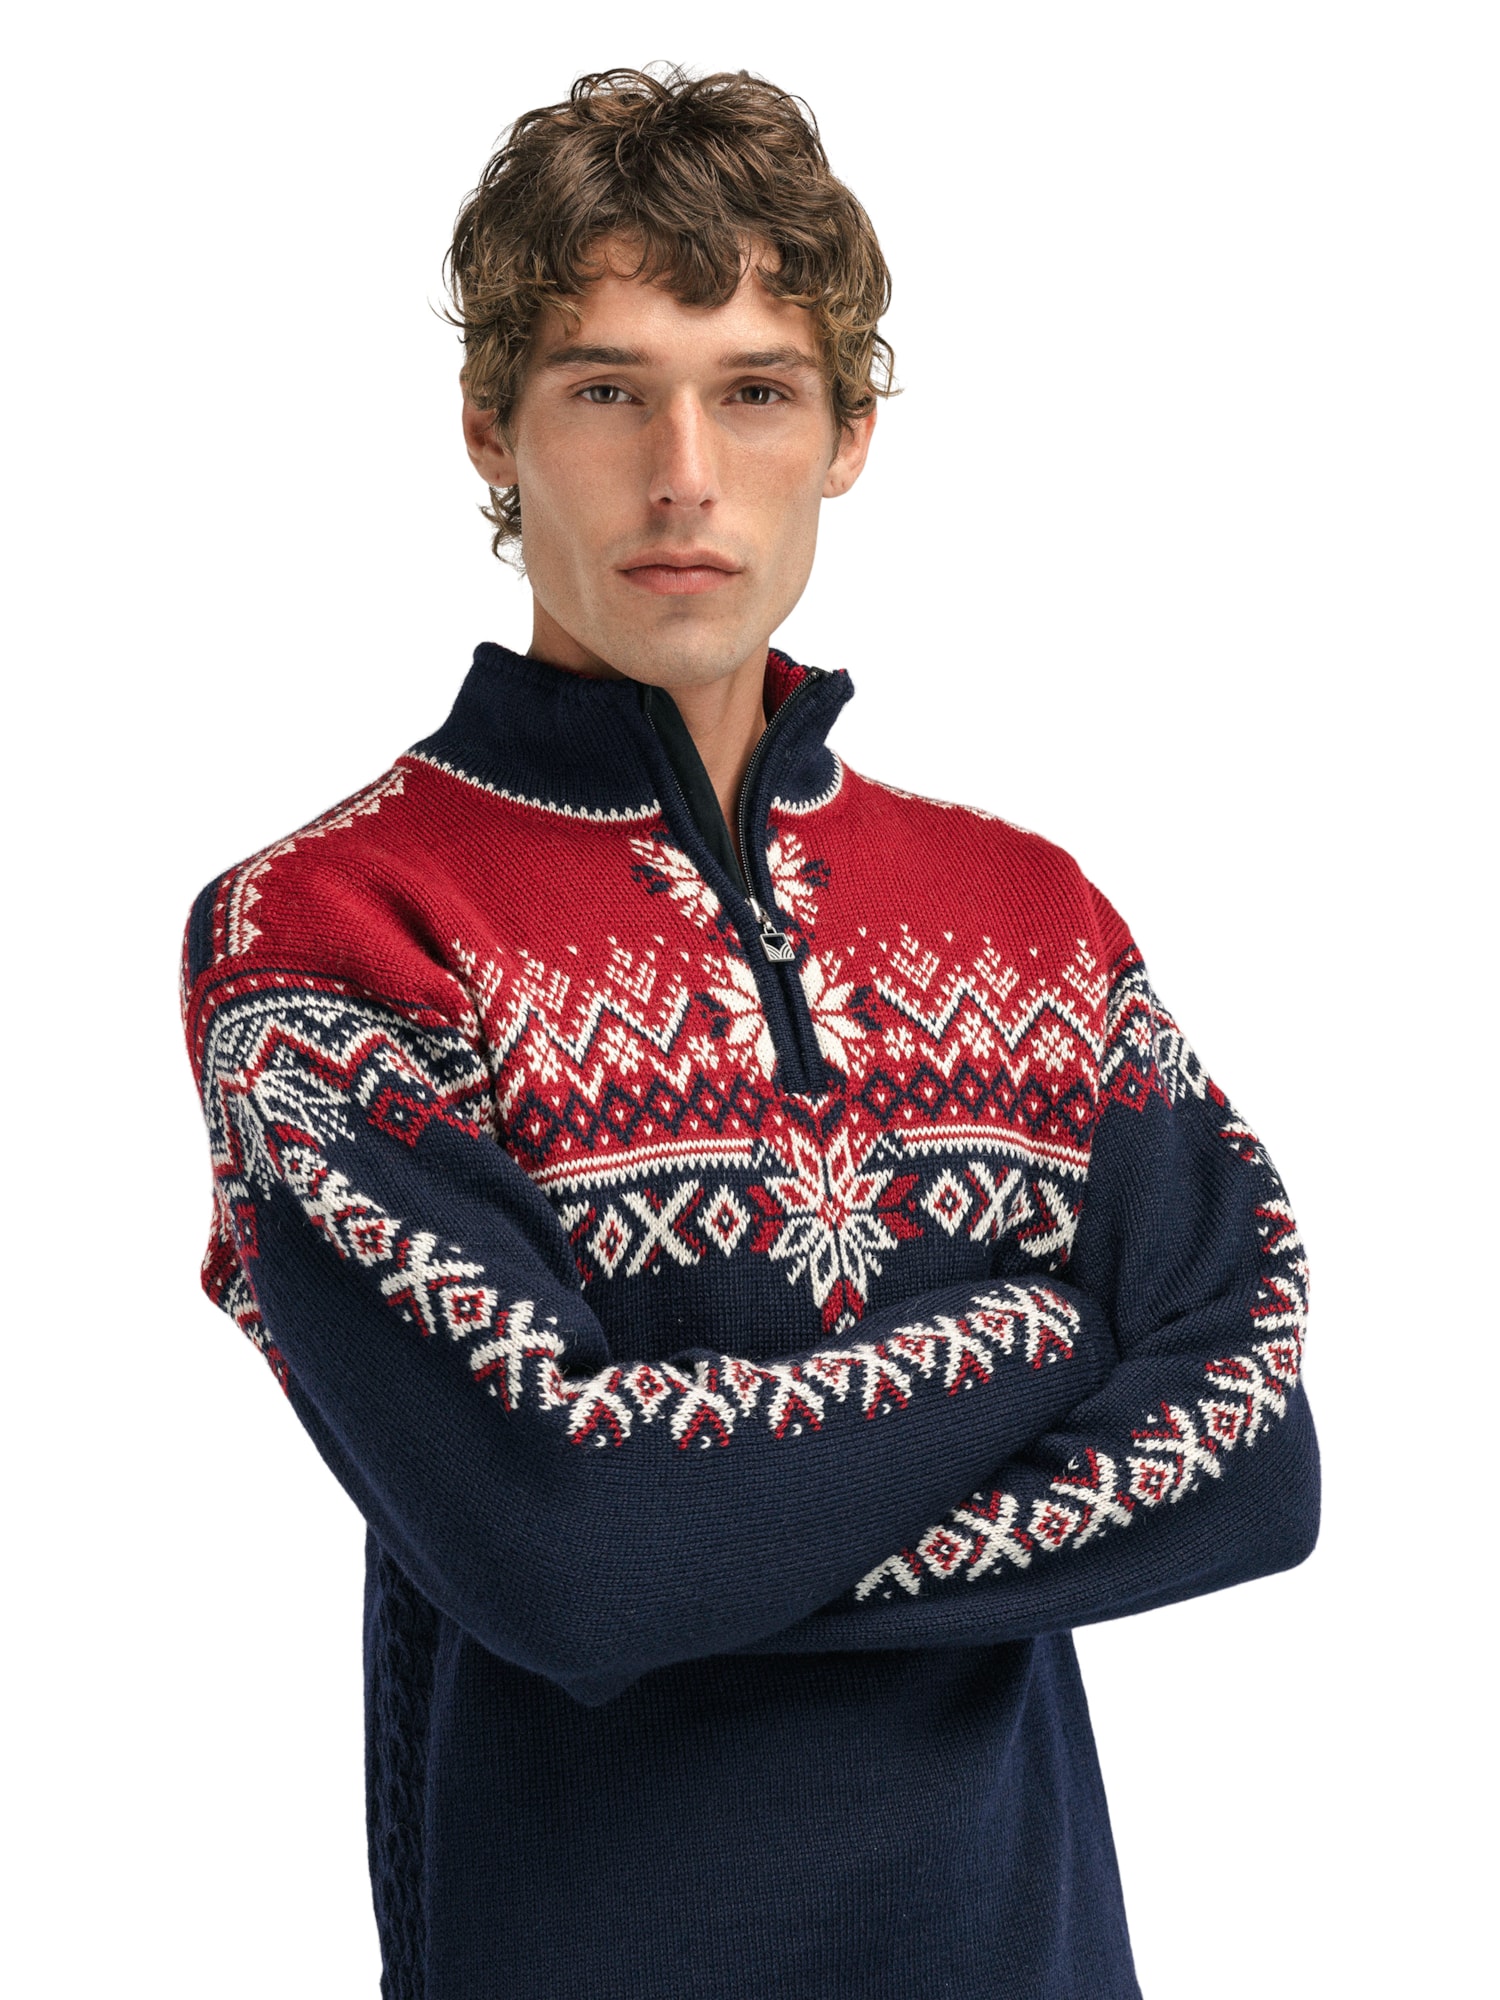 140th Anniversary Sweater - Men - Navy - Dale of Norway - Dale of Norway